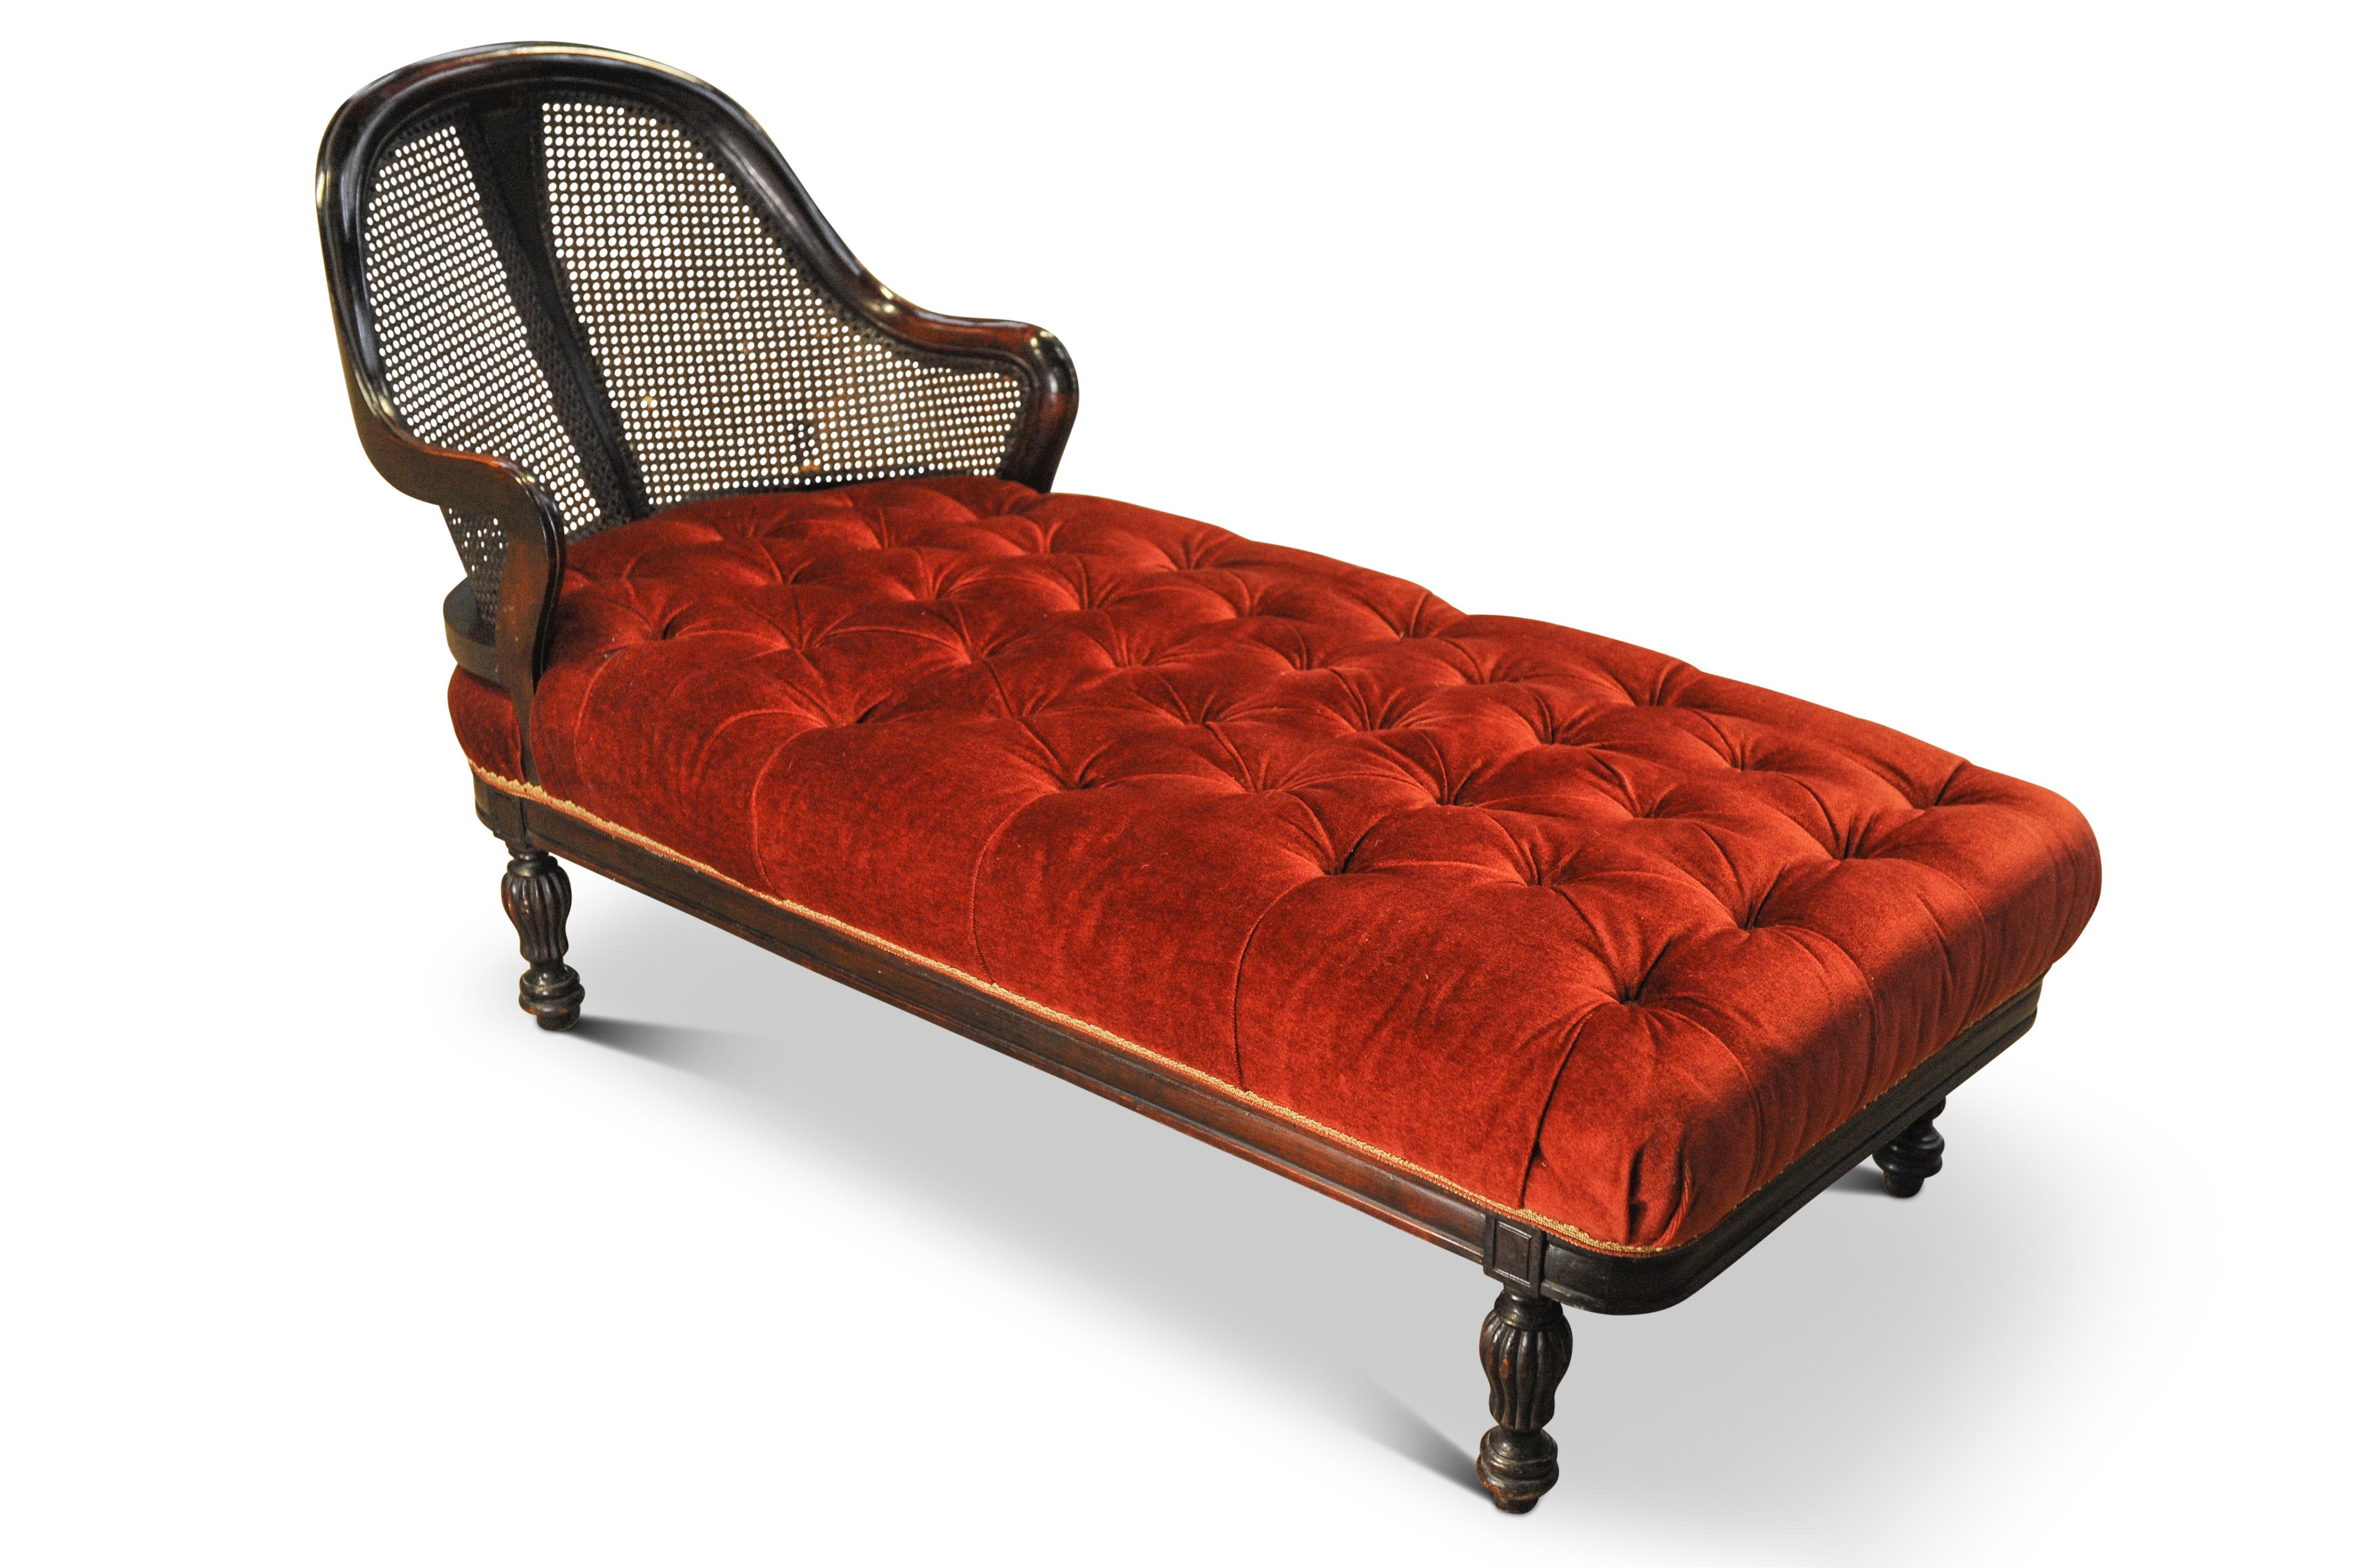 Rare Victorian Red Velvet Chesterfield Bergere Chaise Longue / Day Bed  For Sale 1